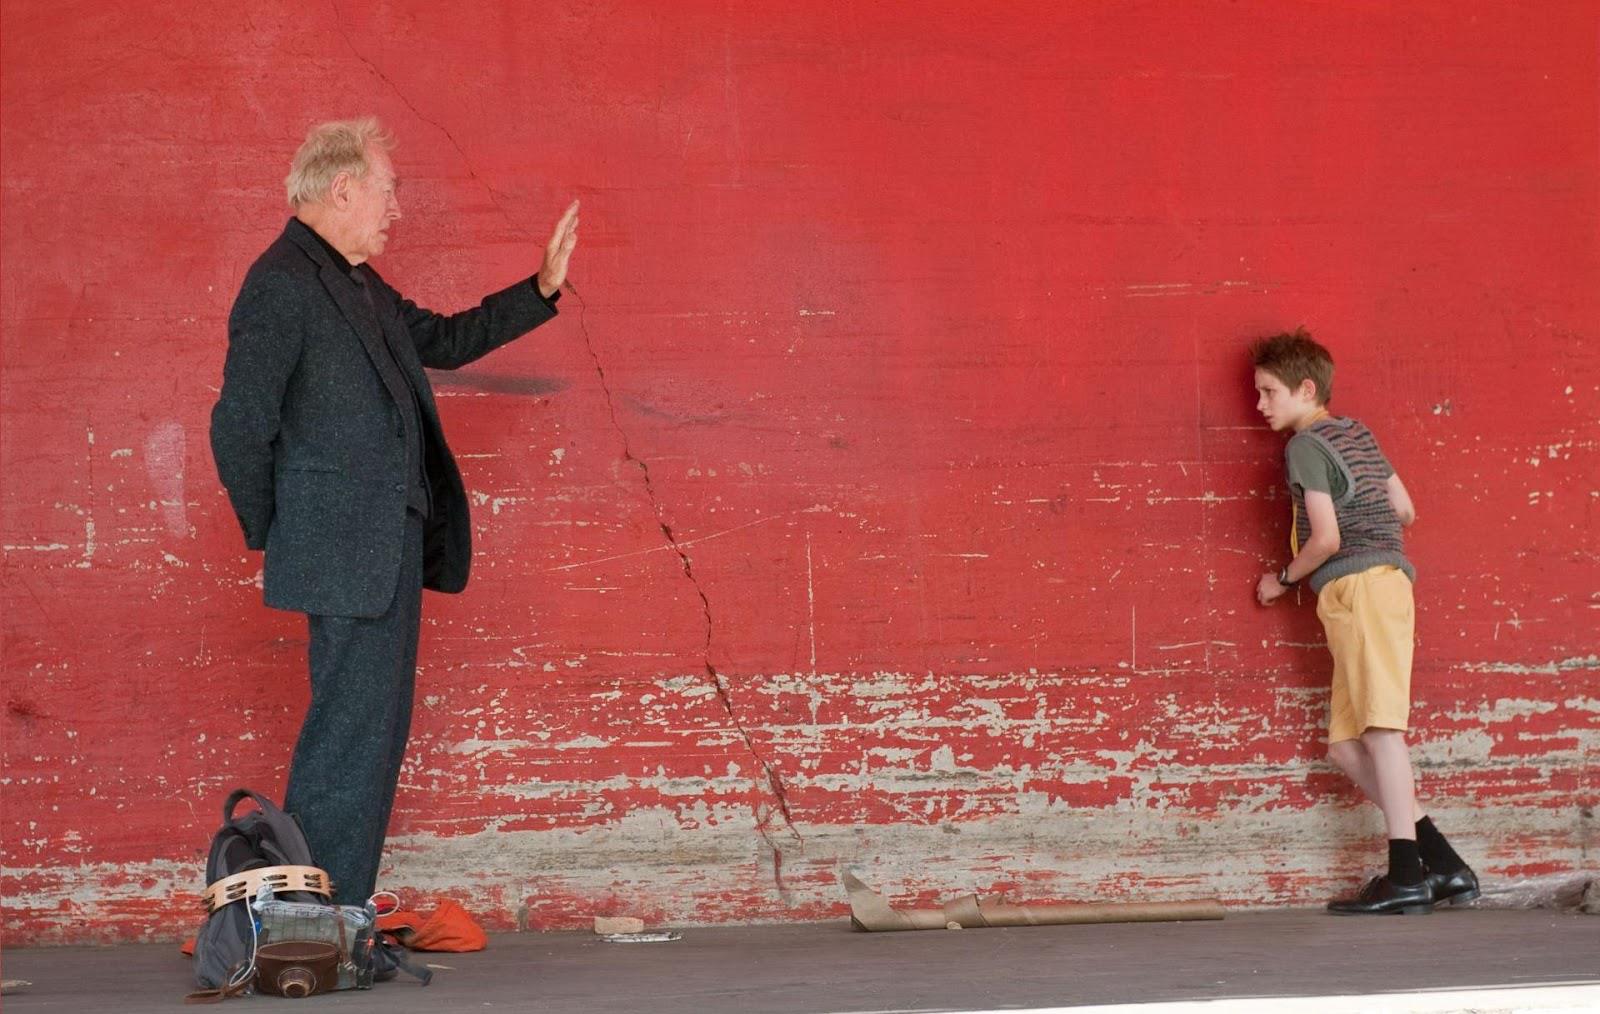 Critica Extremely Loud and Incredibly Close de Stephen Daldry | HTM